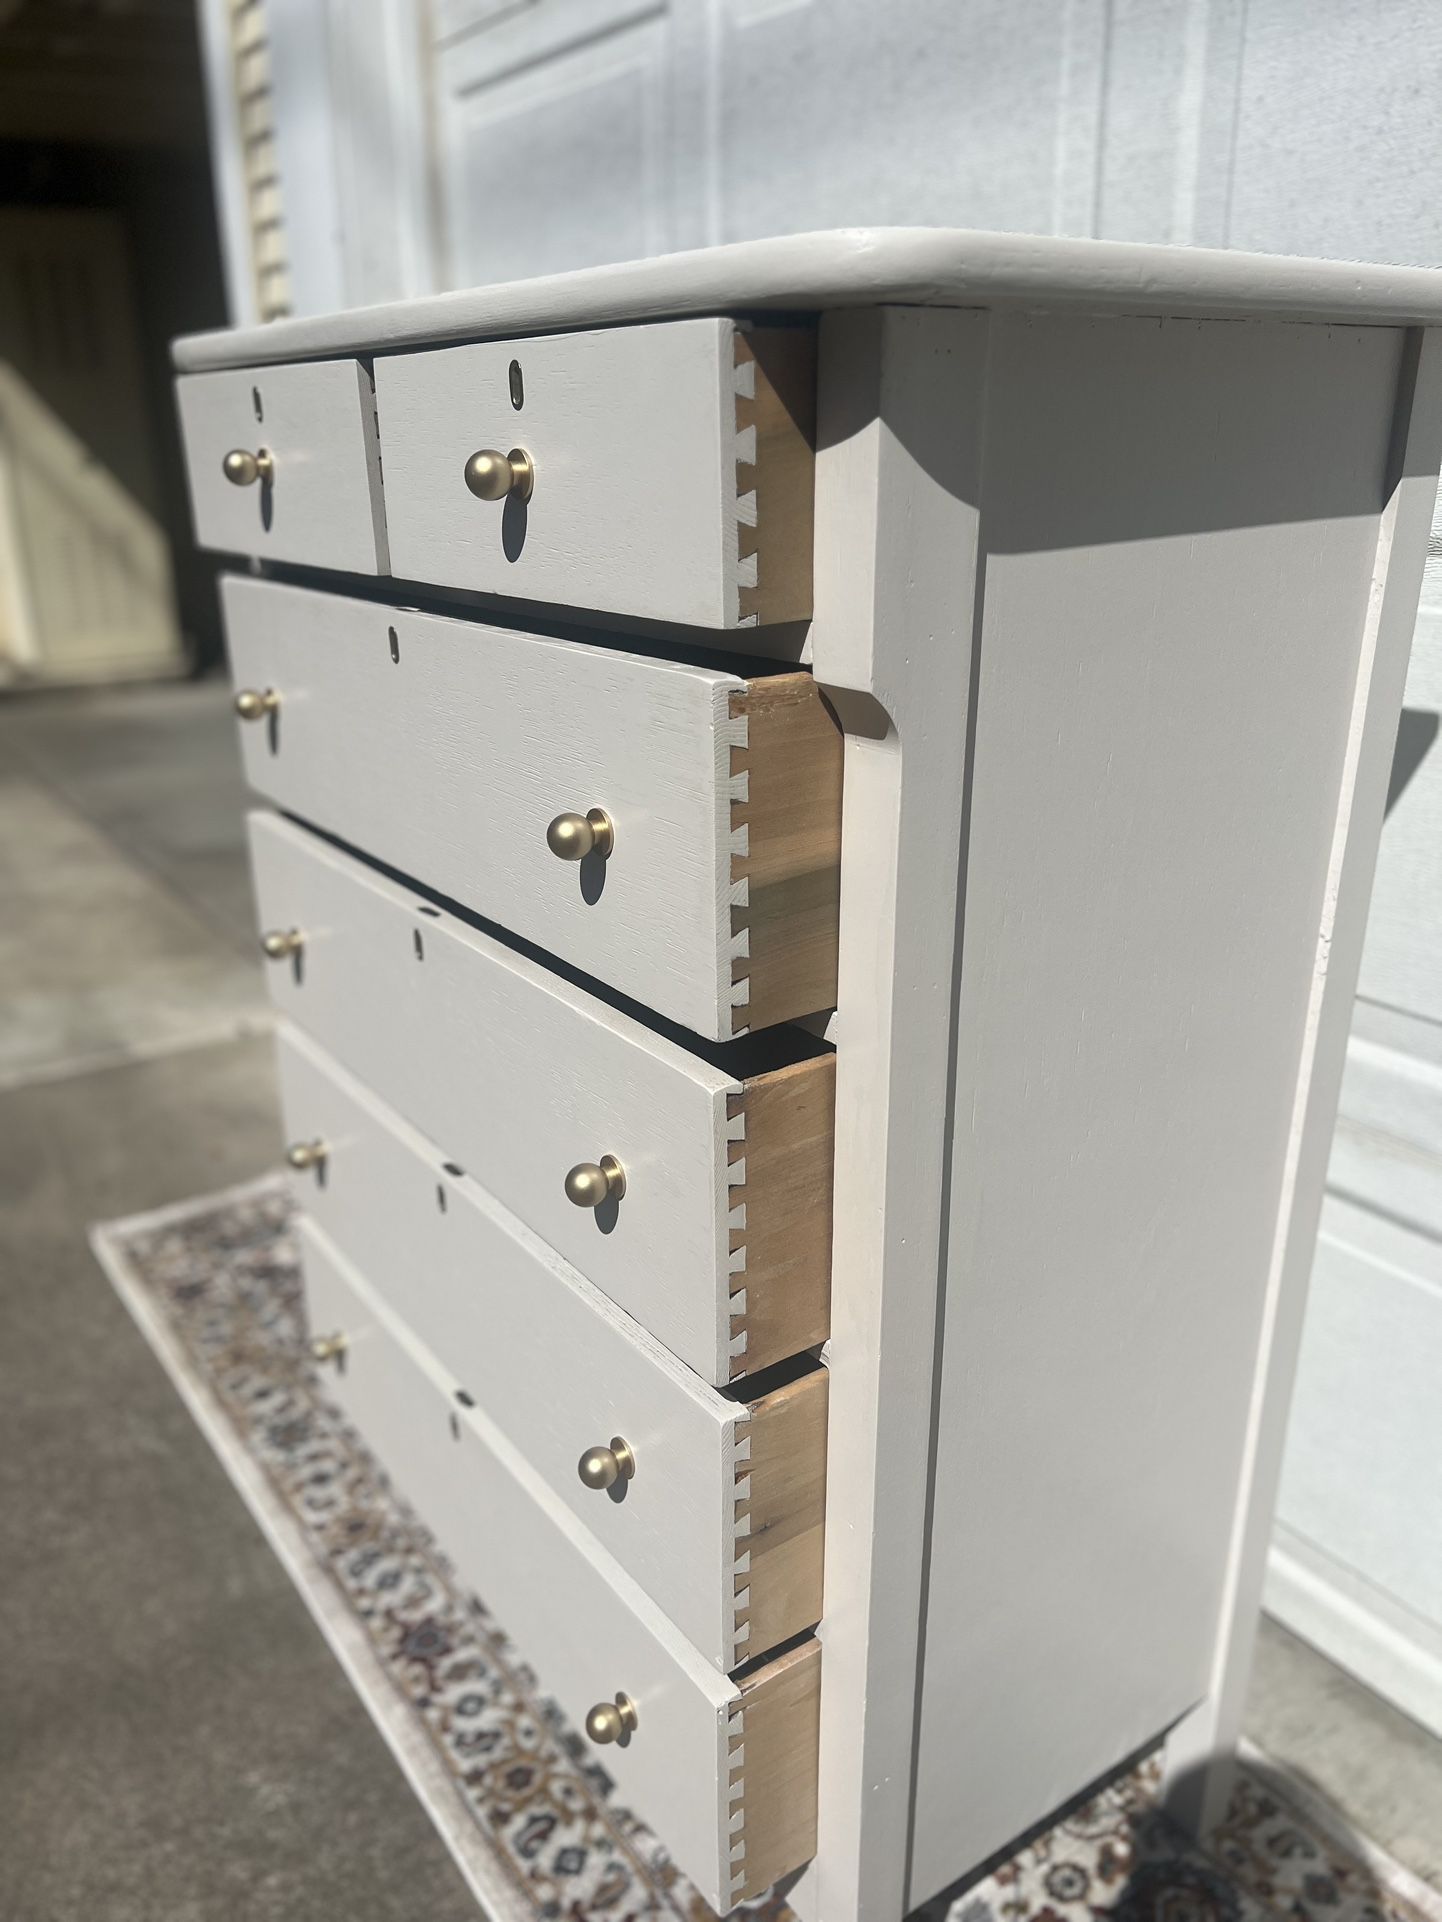 NEWLY REFINISHED 6 DRAWERS OFF-WHITE DRESSER/ARMARIO 